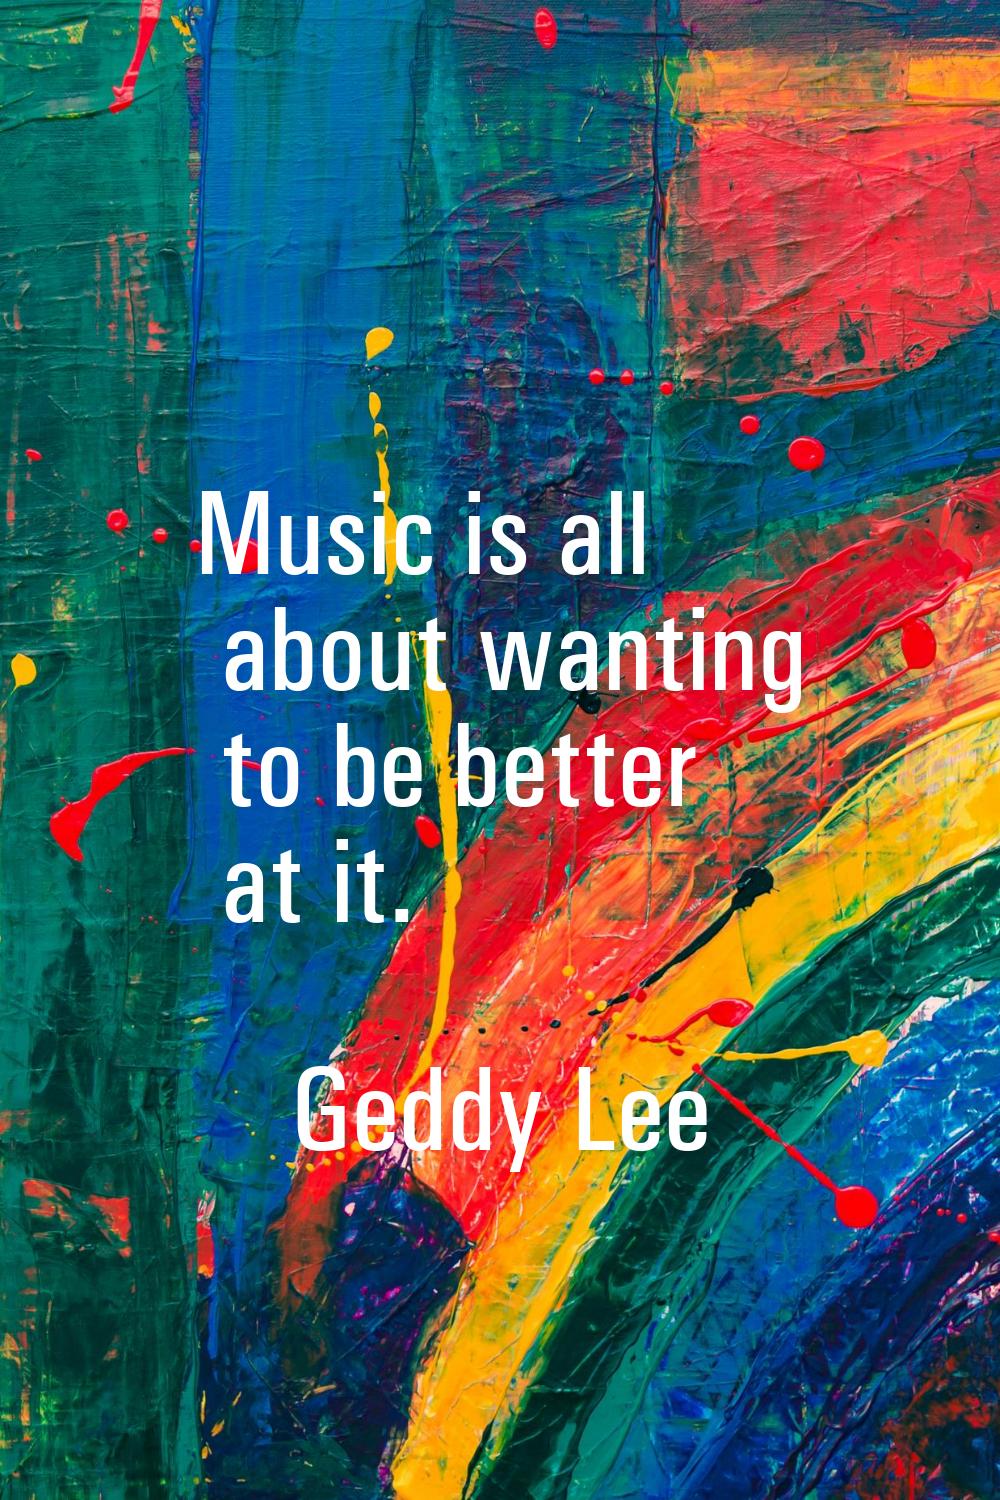 Music is all about wanting to be better at it.